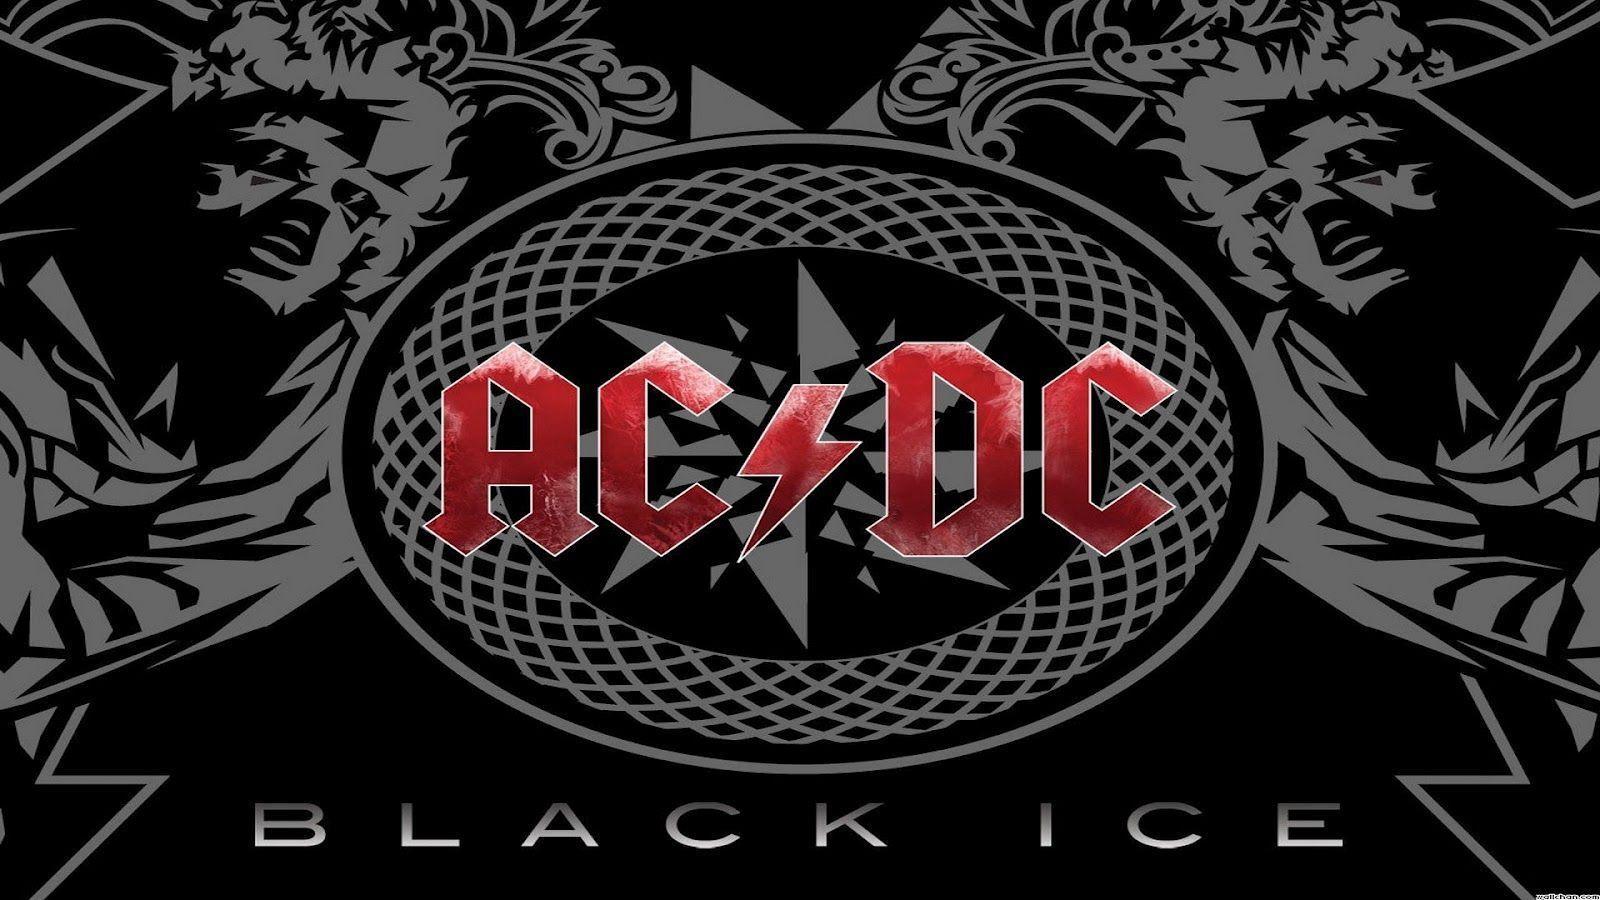 Wallpaper Ac Dc in HD 1600x900PX Wallpaper Acdc